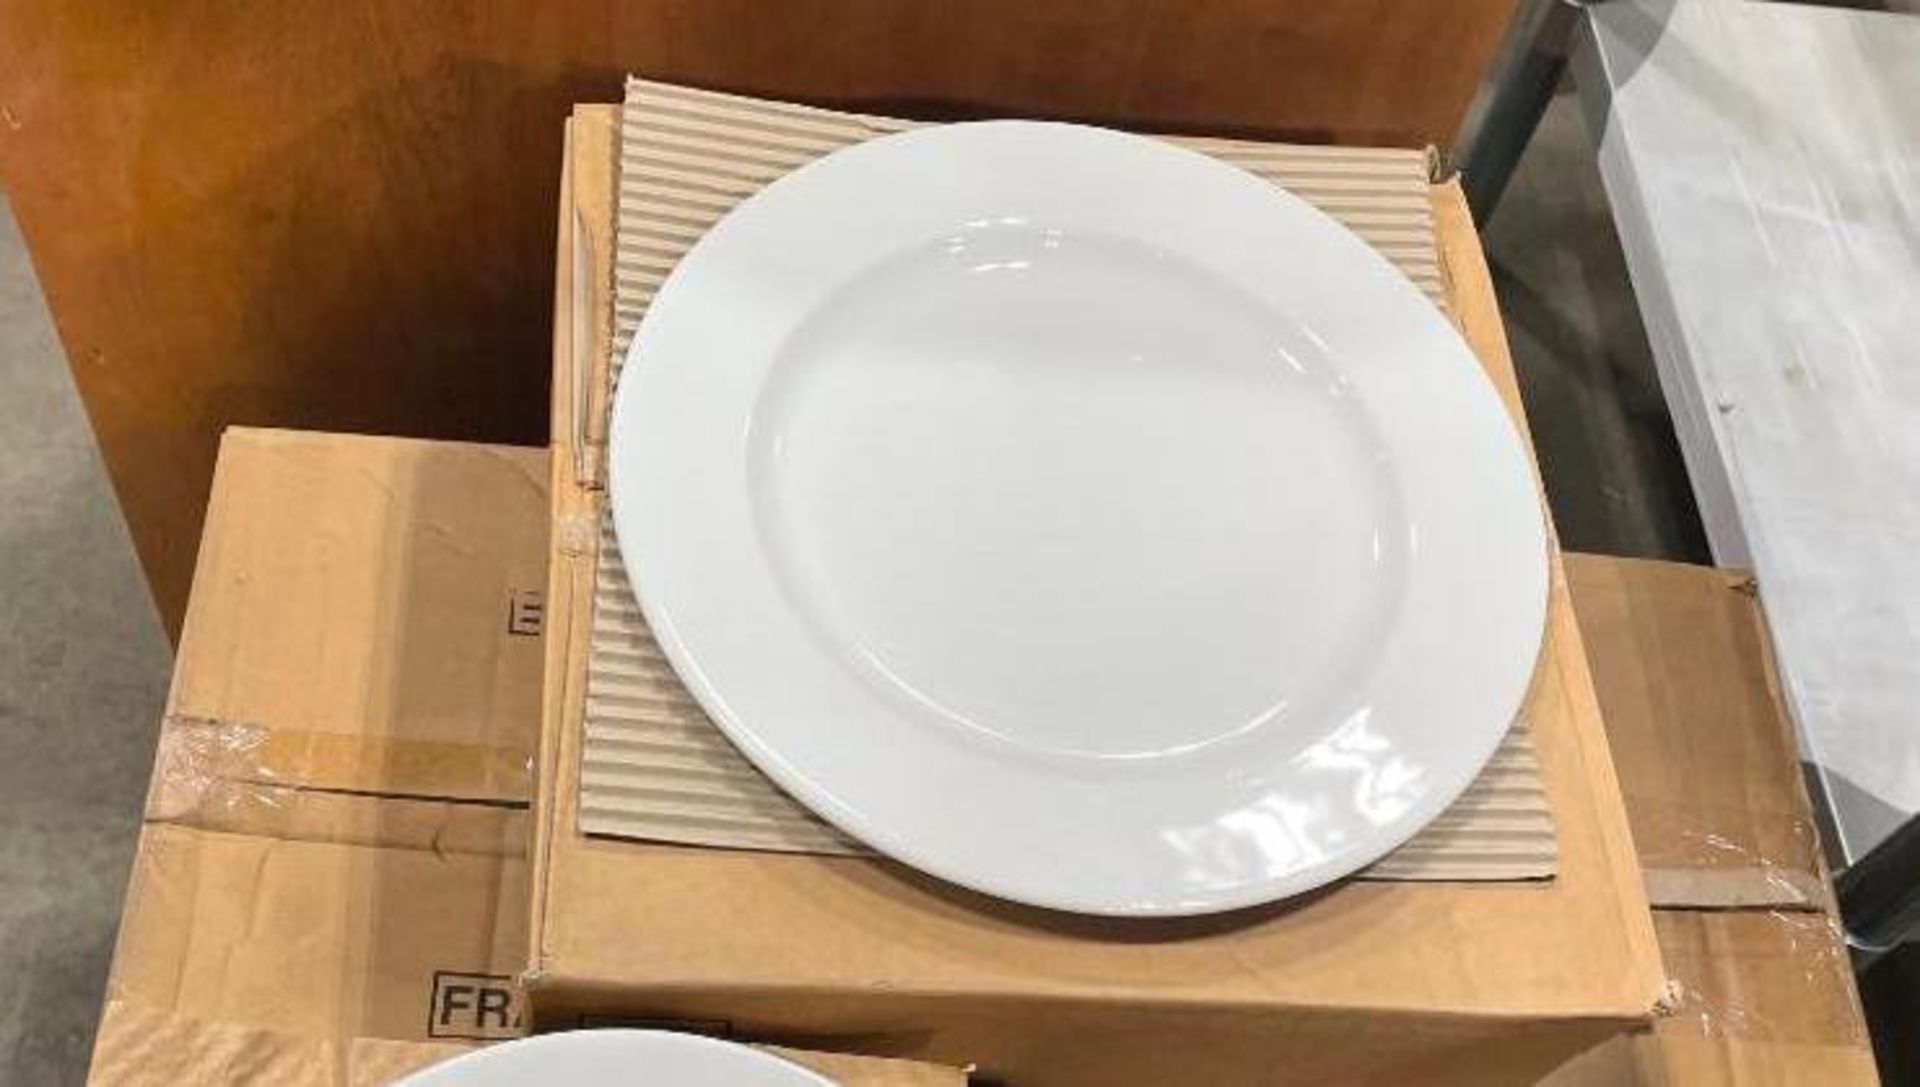 5 CASES OF DUDSON TUDOR WHITE WIDE RIM PLATES 12" - 12/CASE, MADE IN ENGLAND - Image 7 of 7